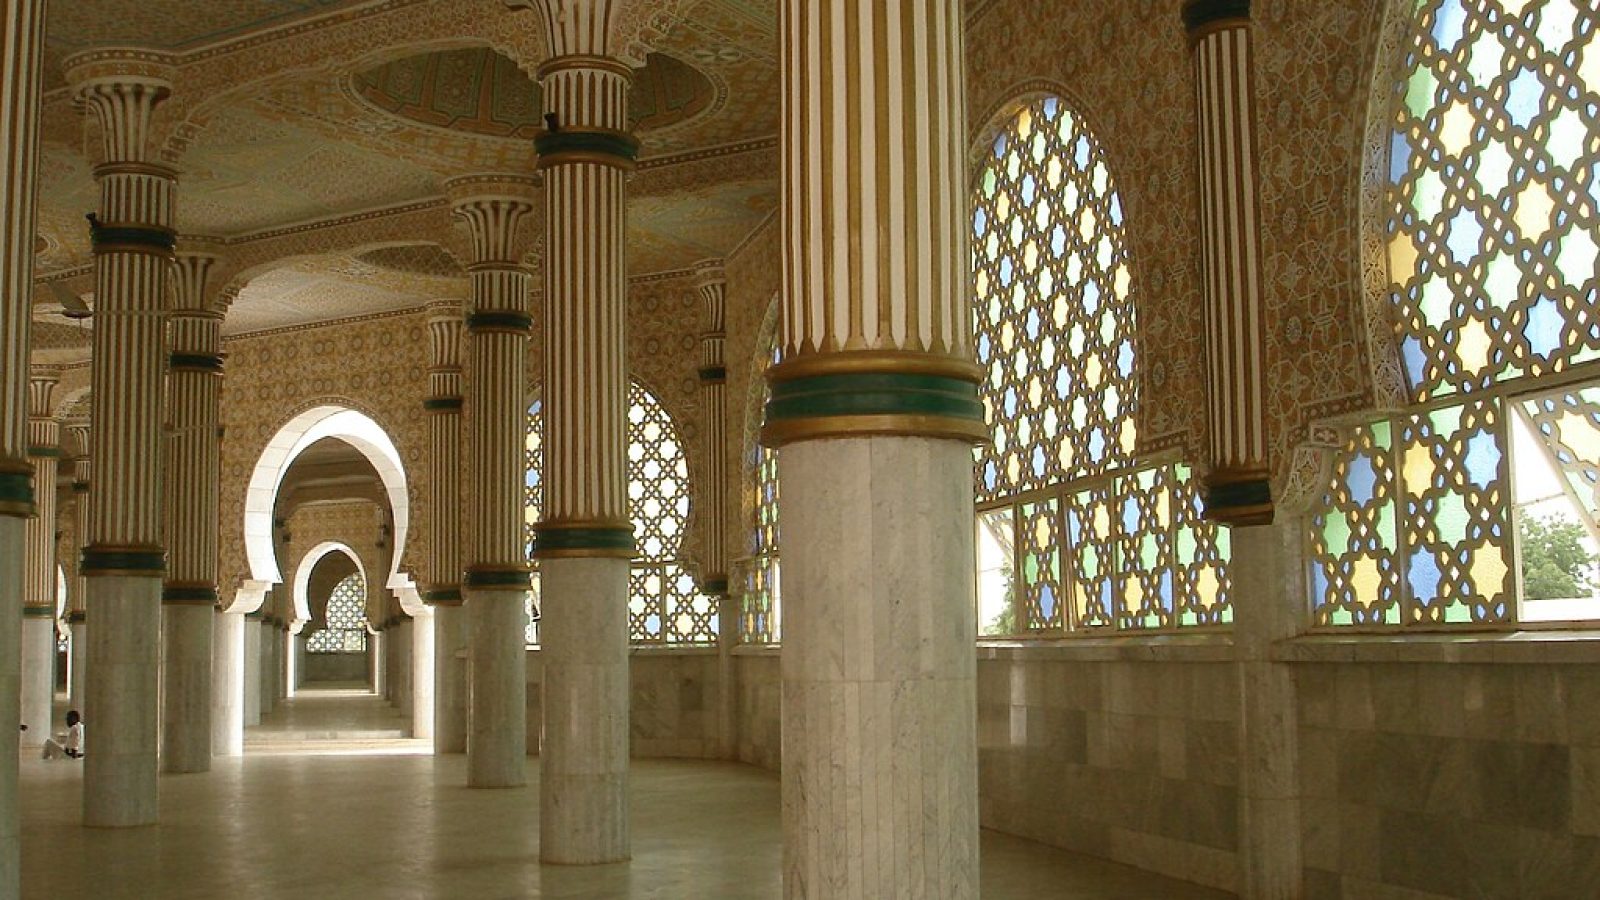 Interior of the Central Mosque of the Mourides in Touba, Senegal